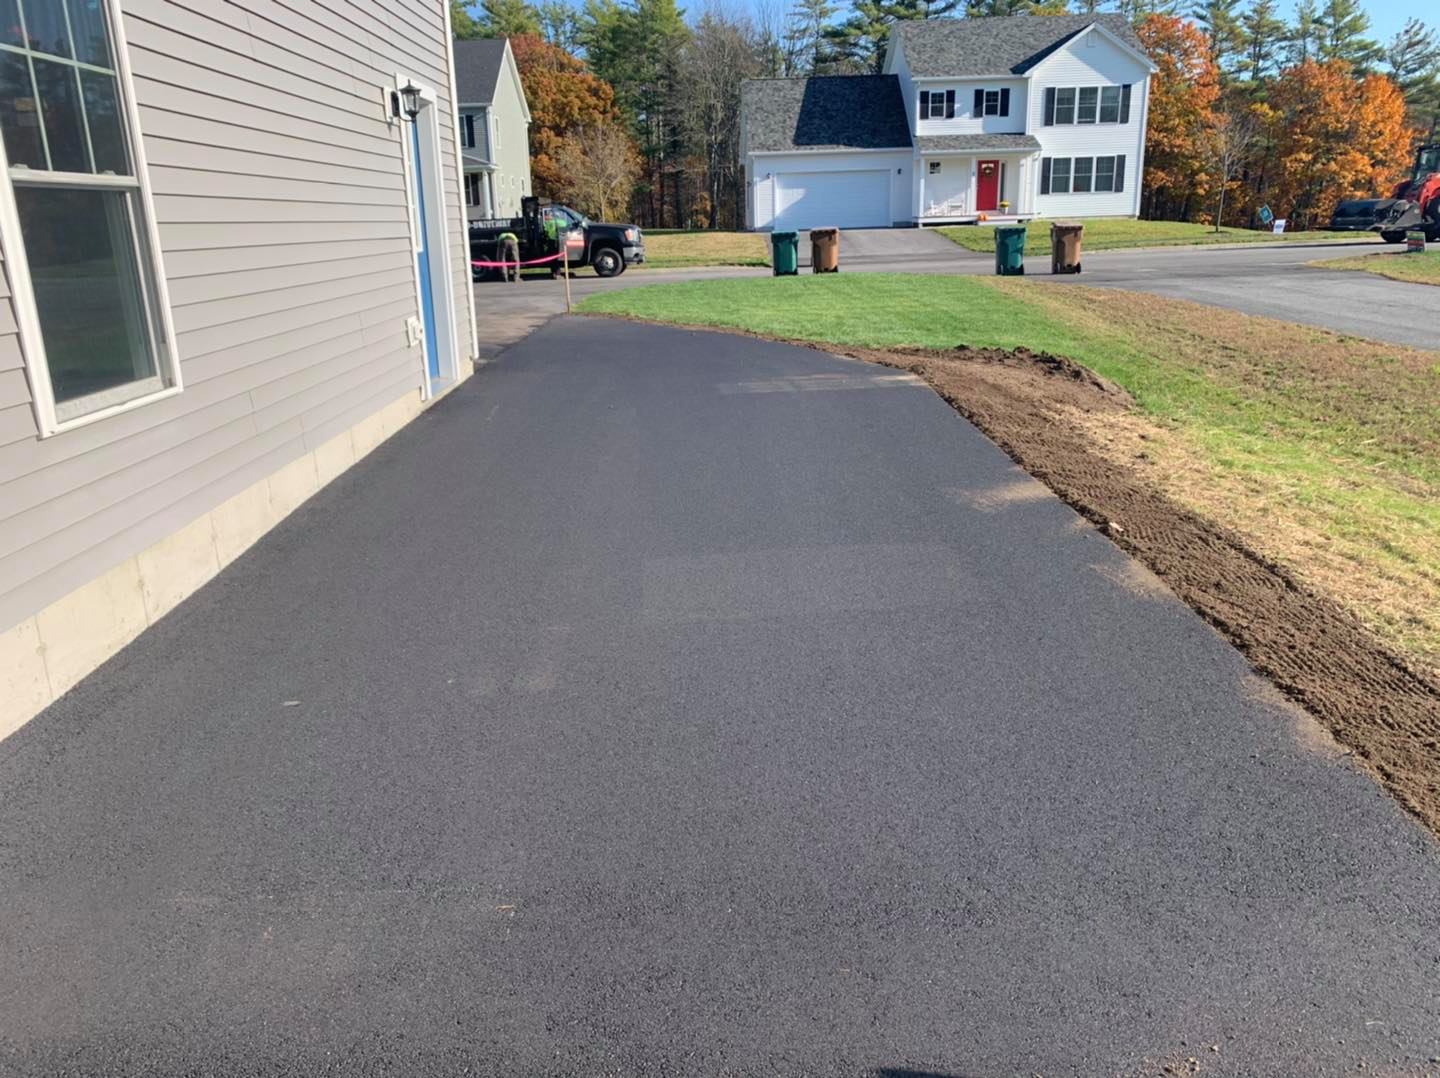 An Addition and patch repair to a residential driveway in Maine